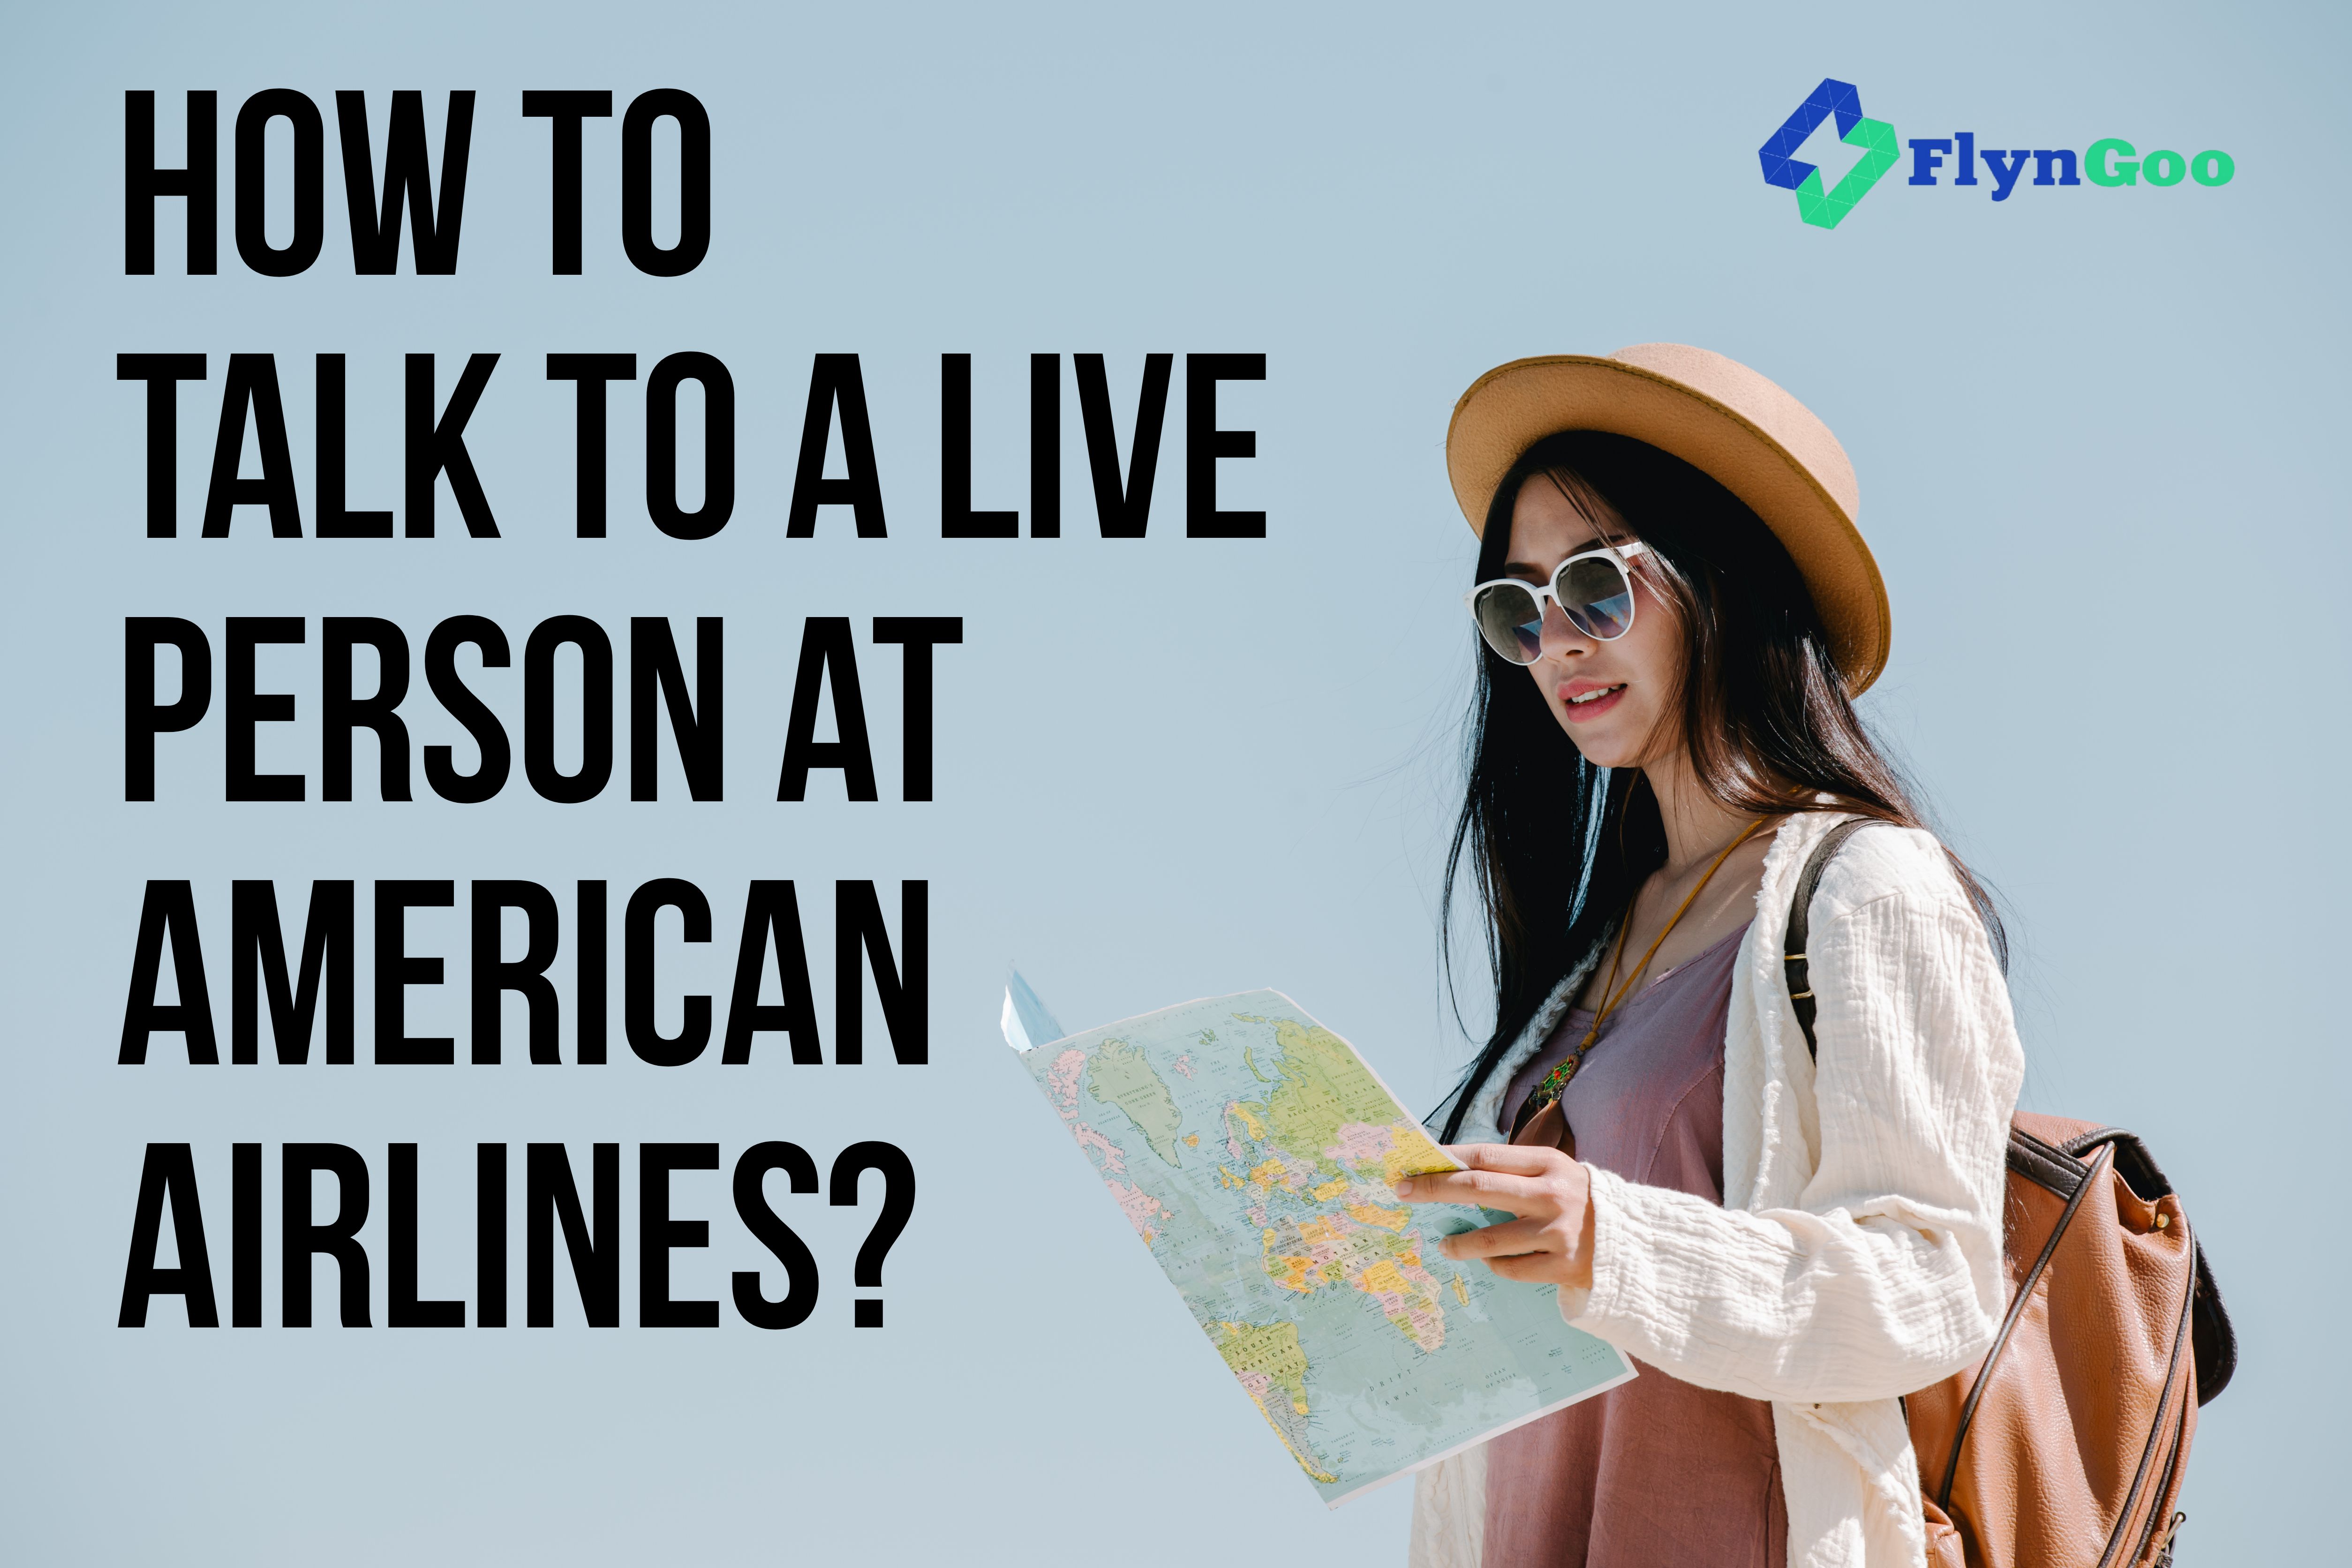 How To Talk To a Live Person at American Airlines?